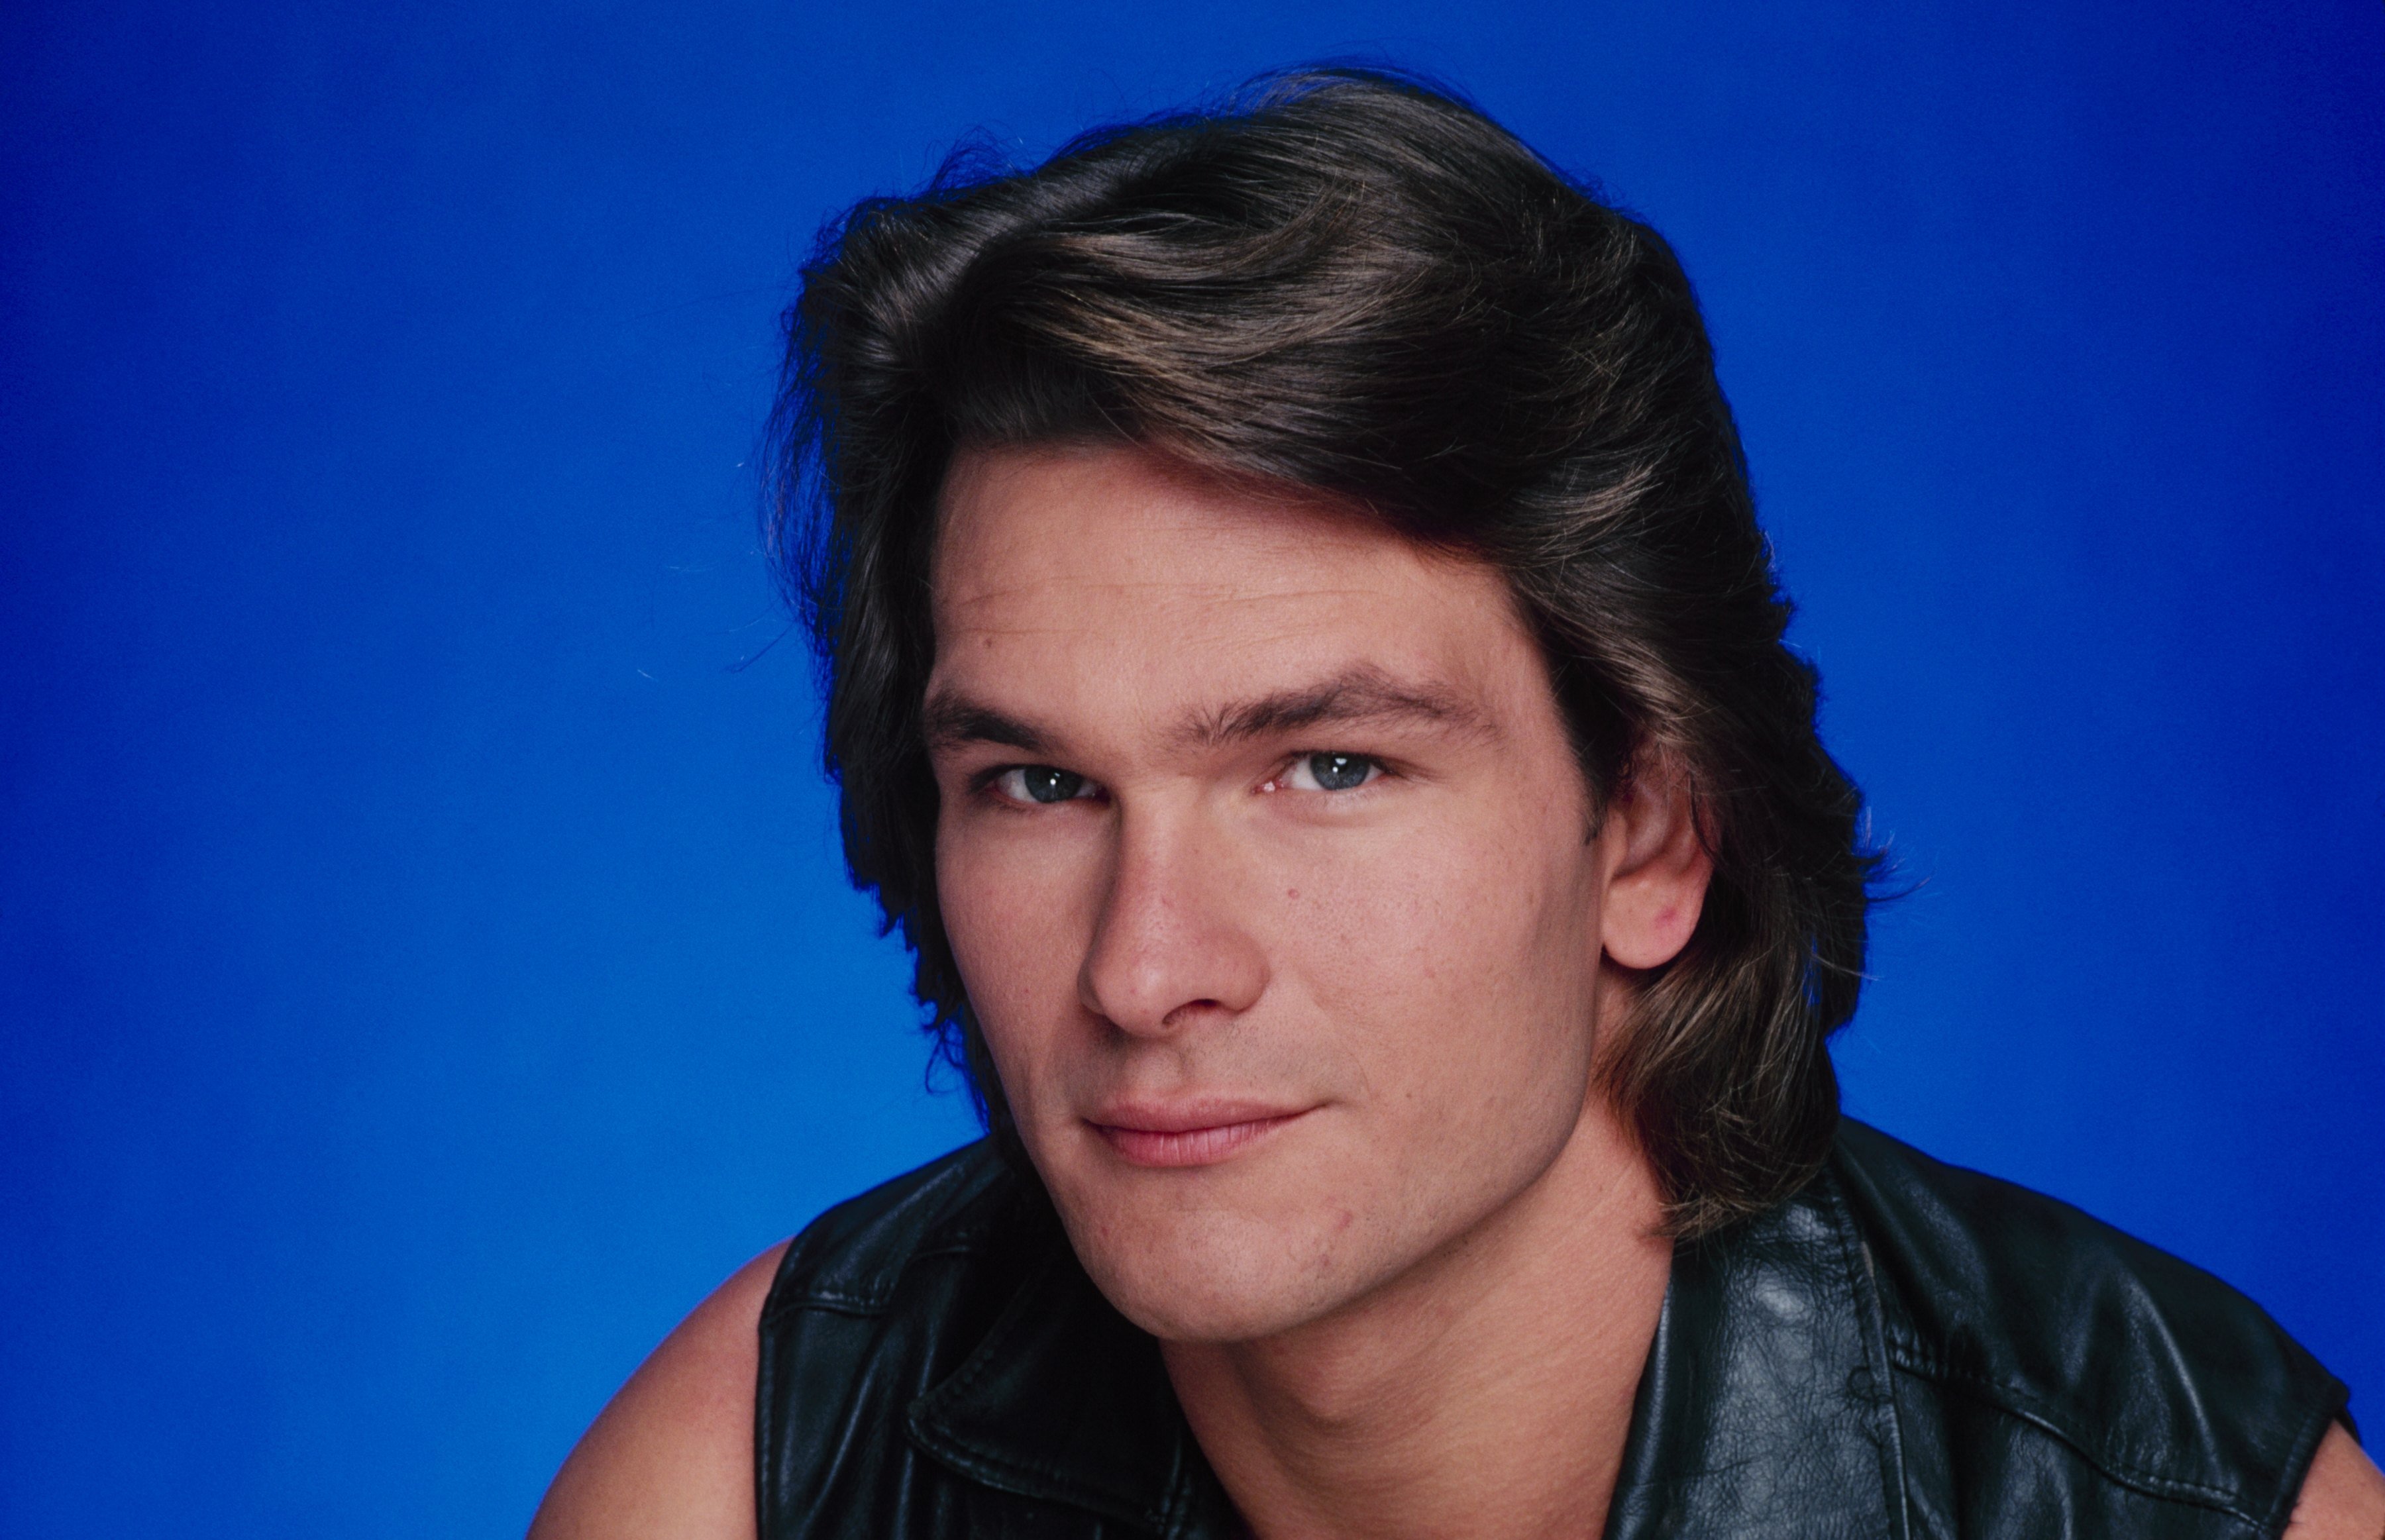 Patrick Swayzes Last Words Before He Slipped Into A Coma 